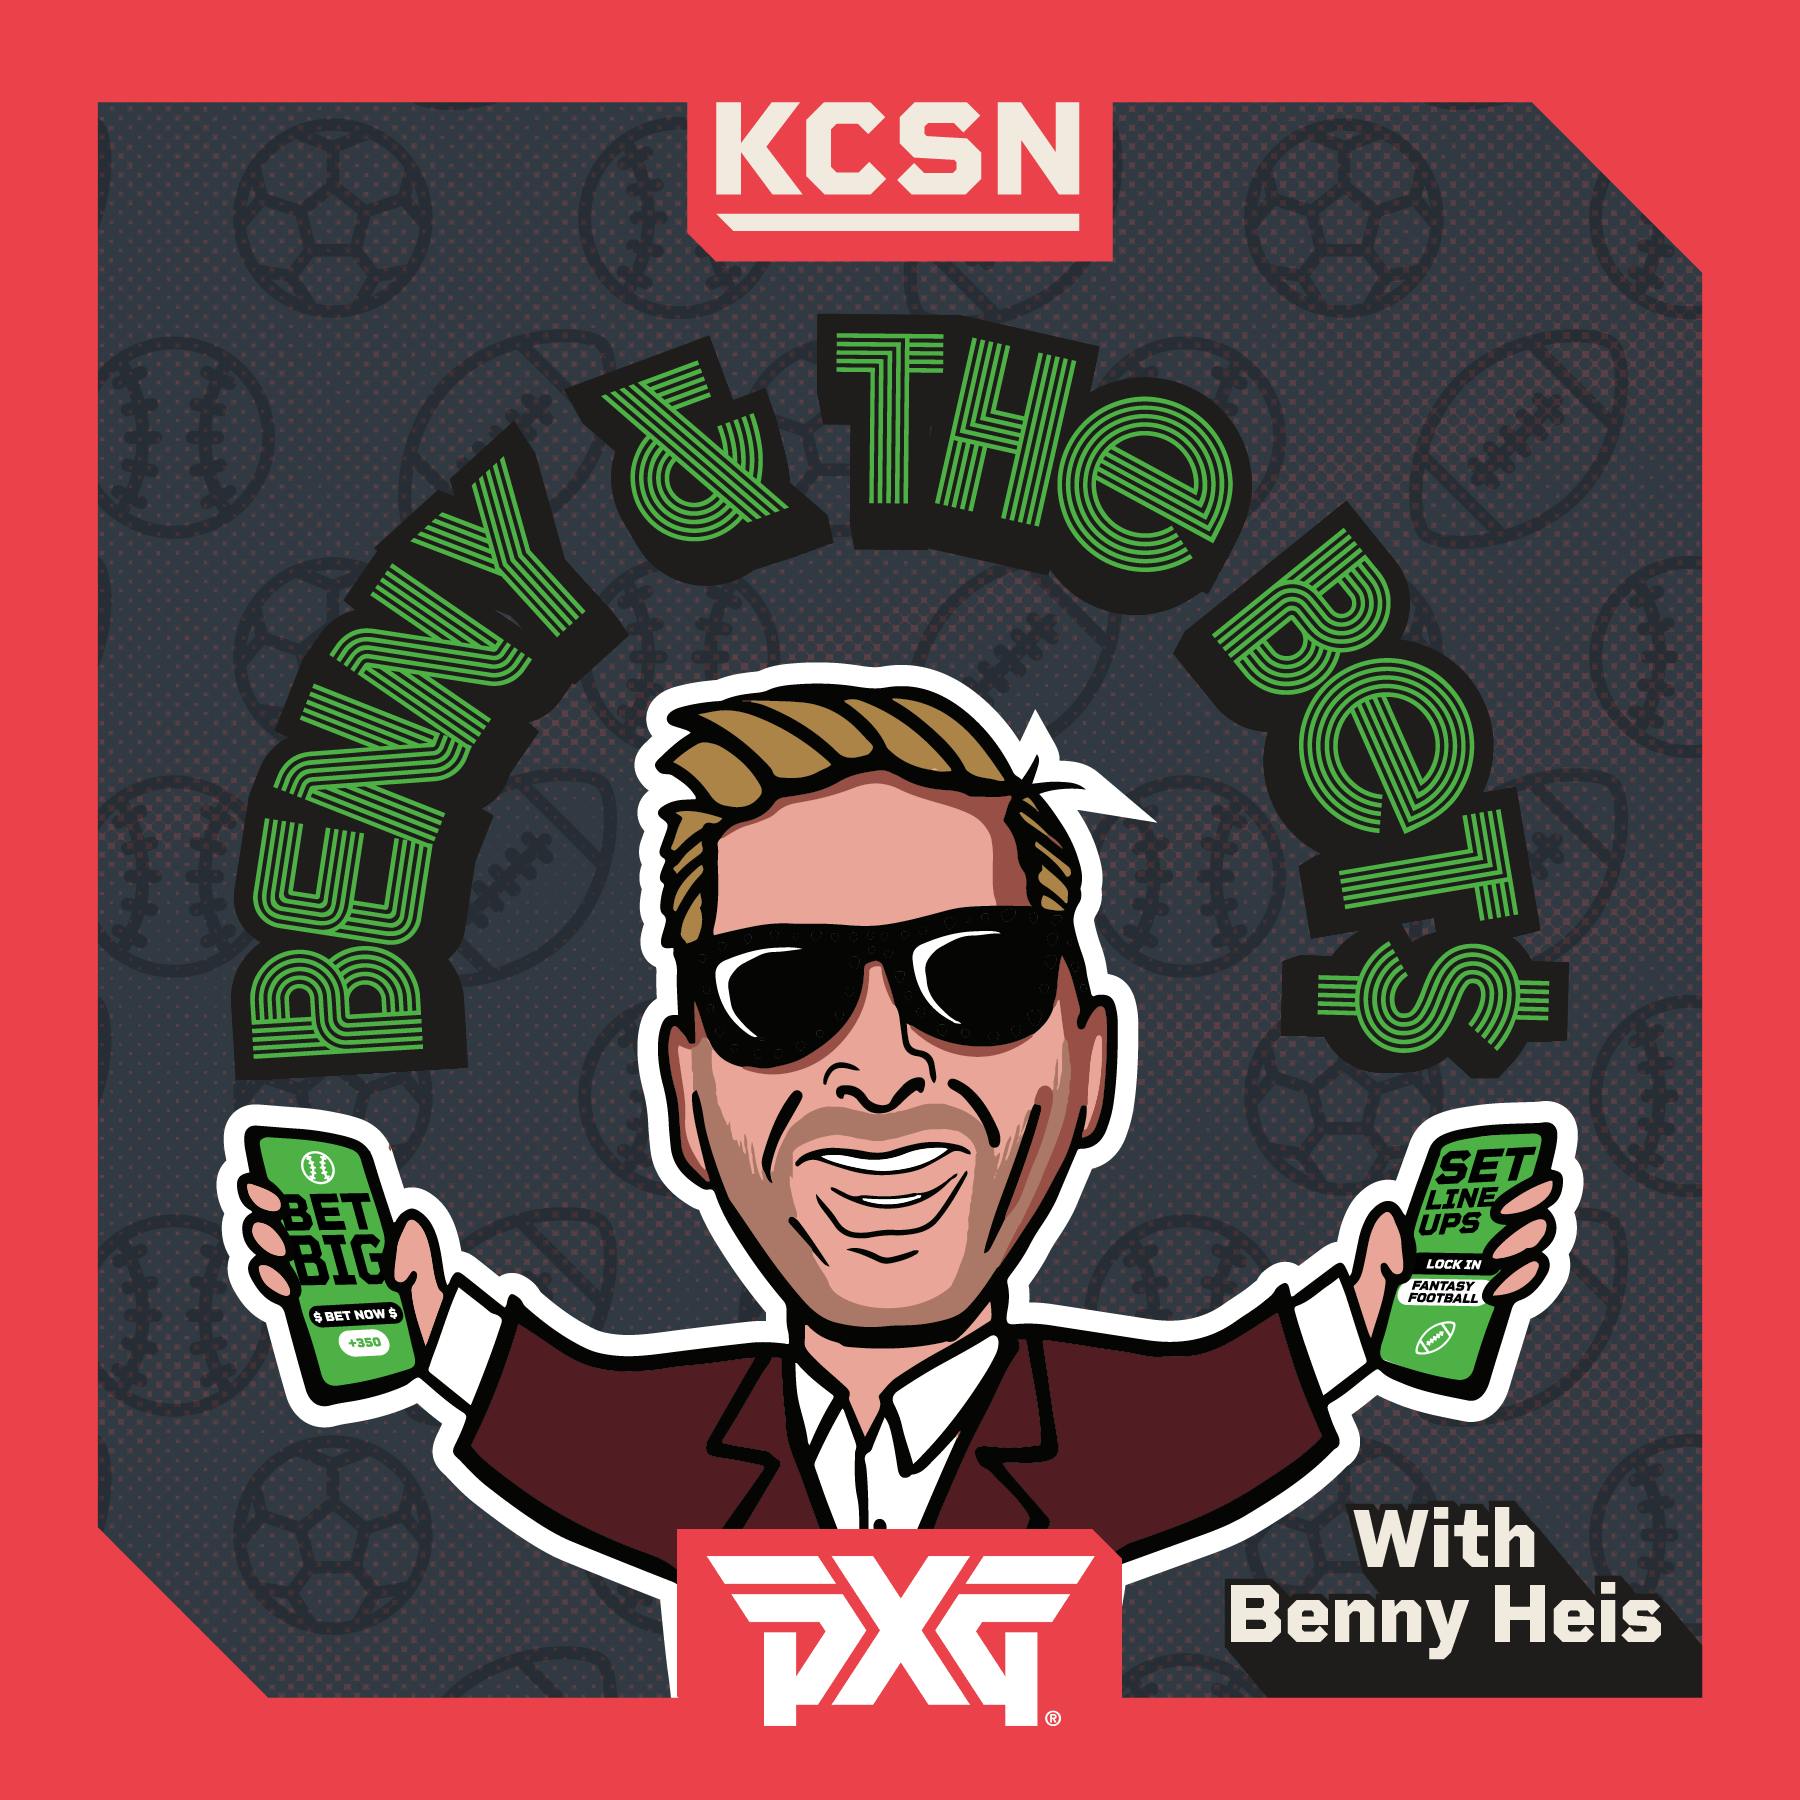 Benny and the Bets 2/2: Damon Bruce Breaks Down Chiefs-Niners + Benny Gives His Early Top Super Bowl Bets